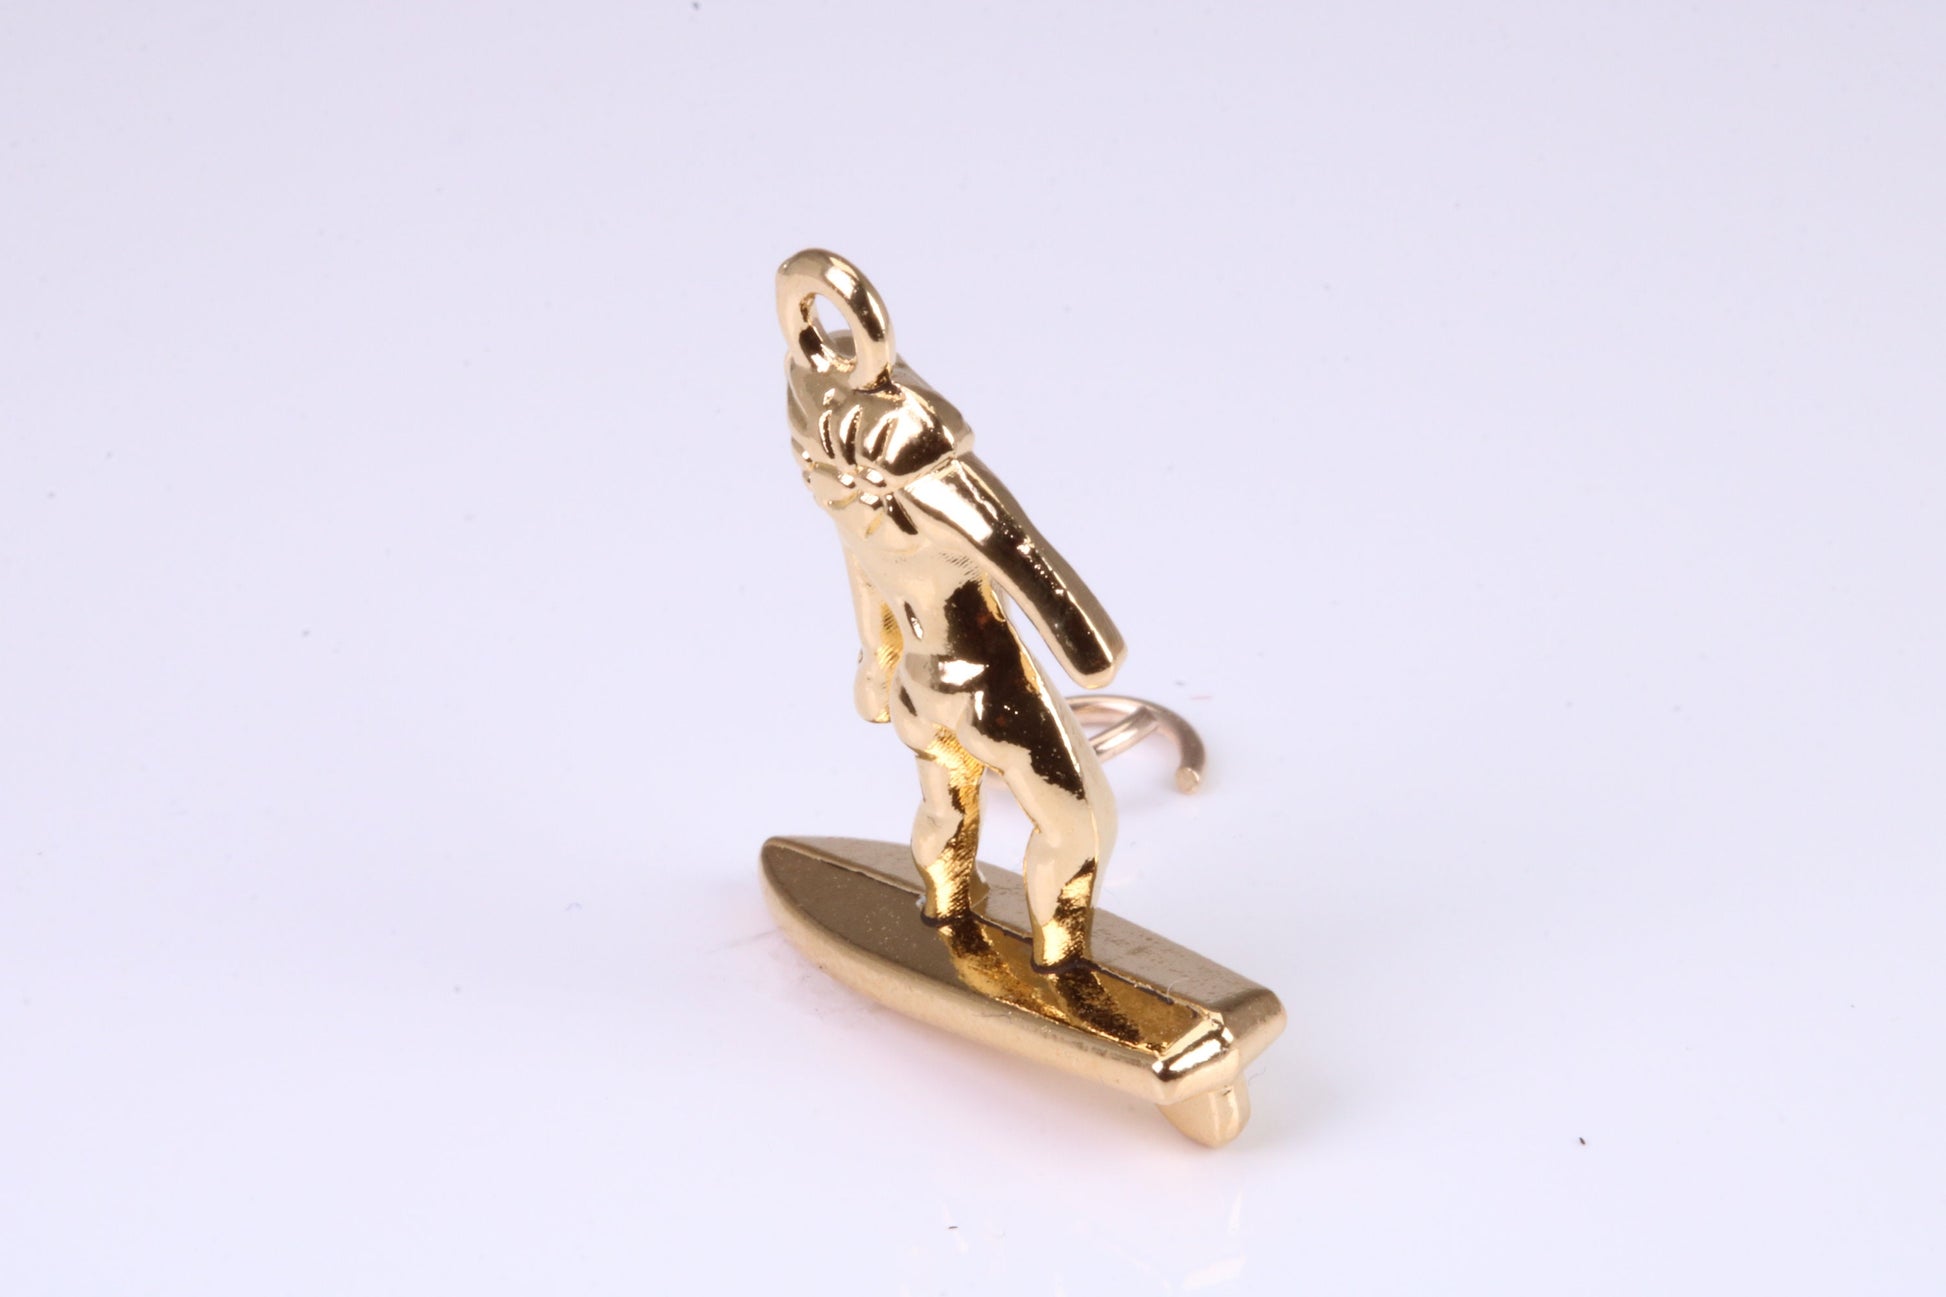 Surfing Girl Charm, Traditional Charm, Made from Solid Yellow Gold, British Hallmarked, Complete with Attachment Link